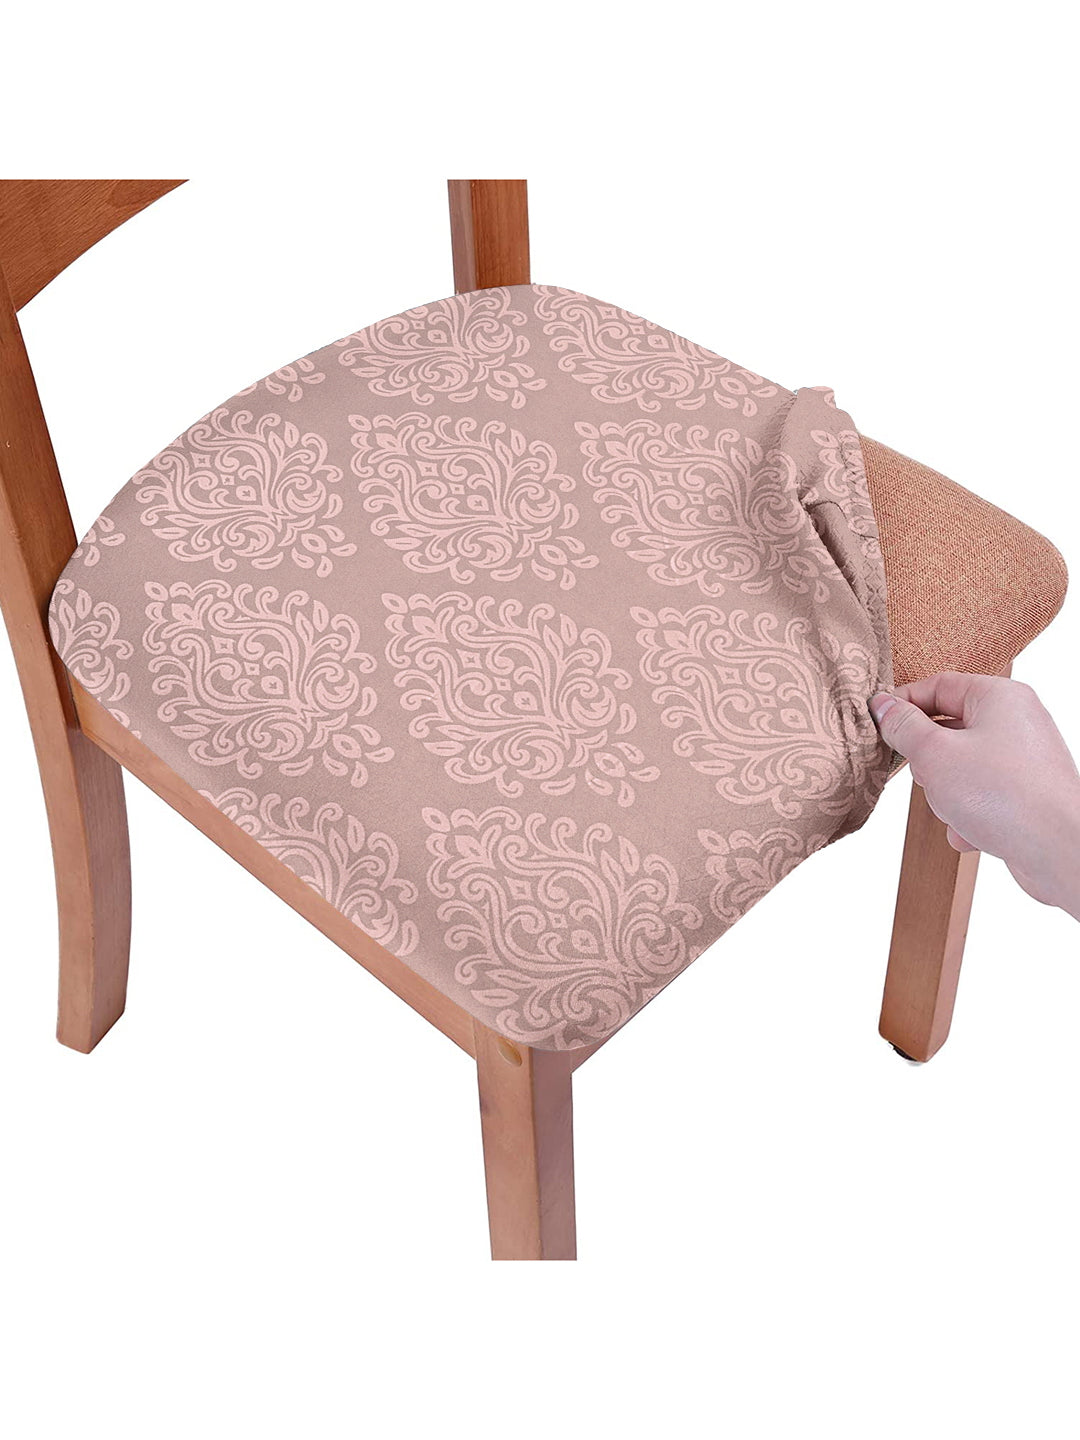 Stretchable Ethnic Printed Non Slip Chair Pad Cover Pack of 1- Pink